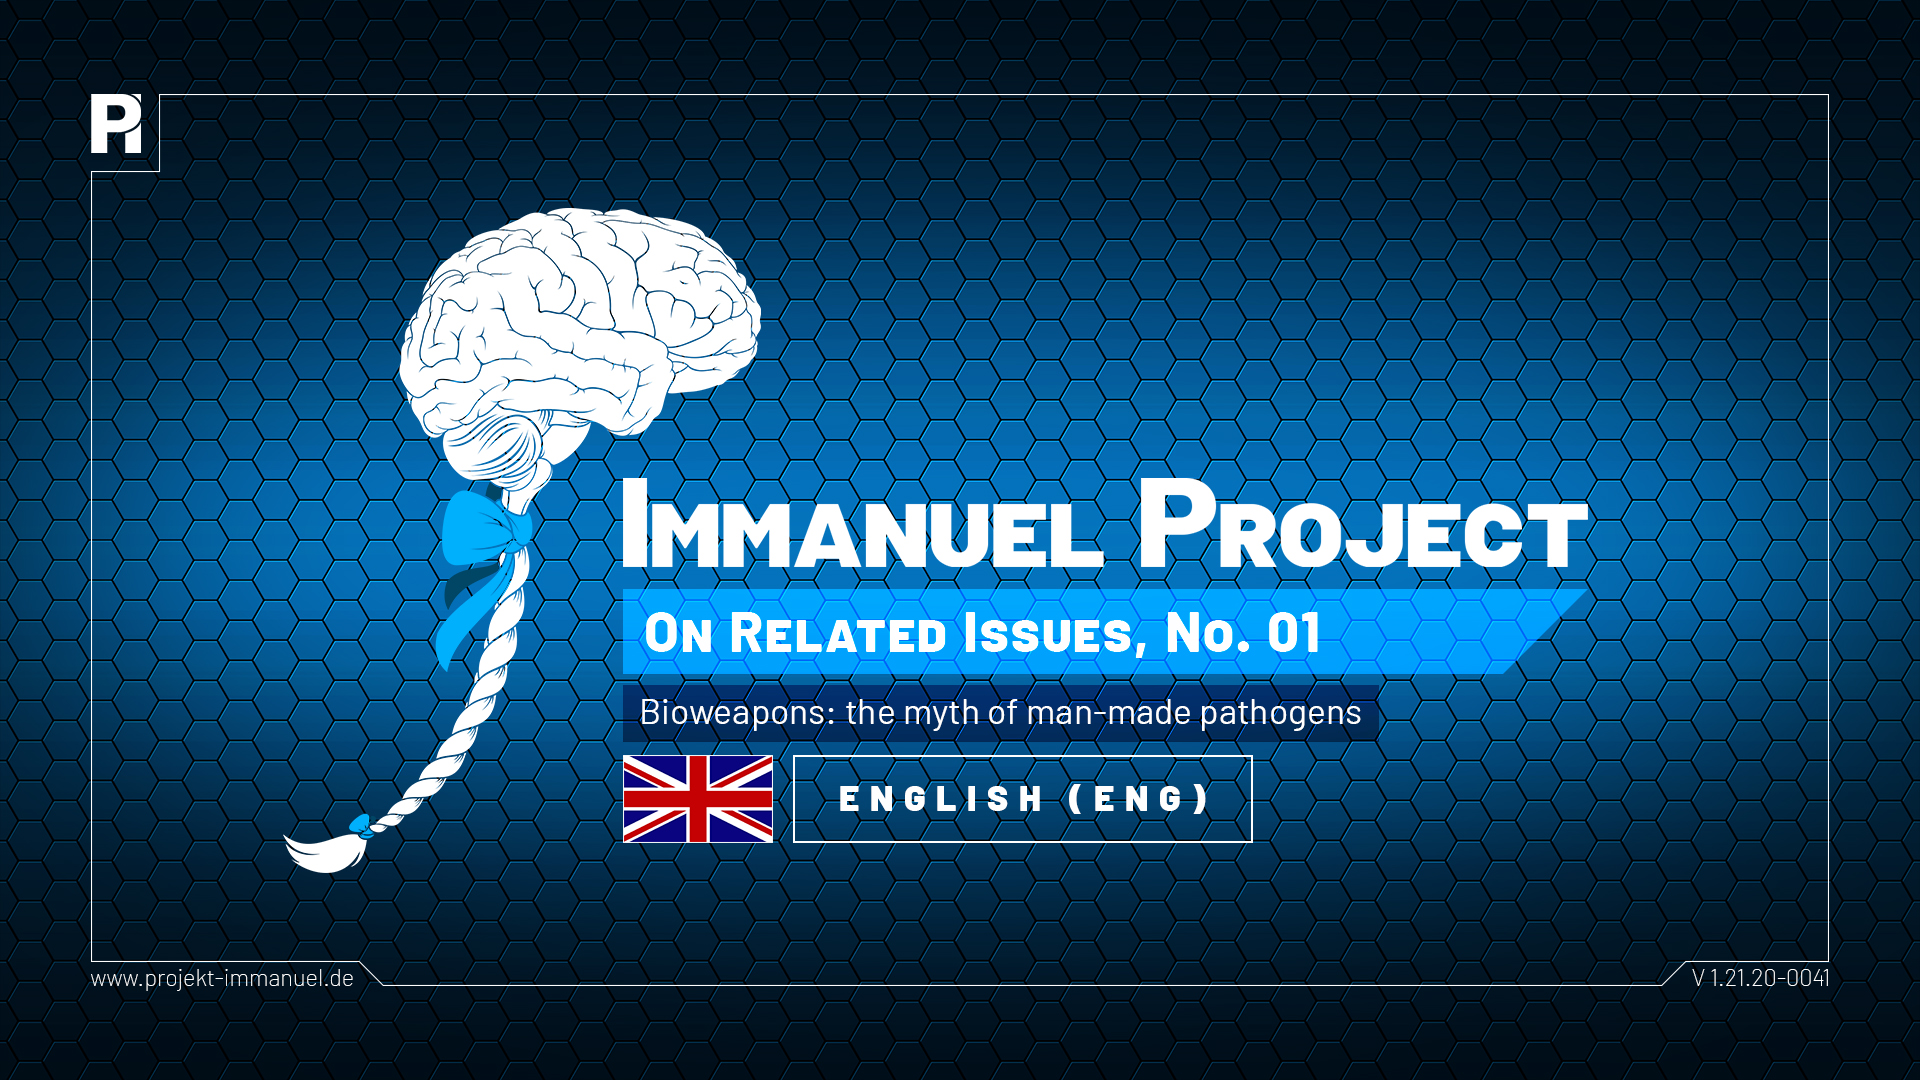 Immanuel Project - O.R.I., No. 01: bioweapons - the myth of ...